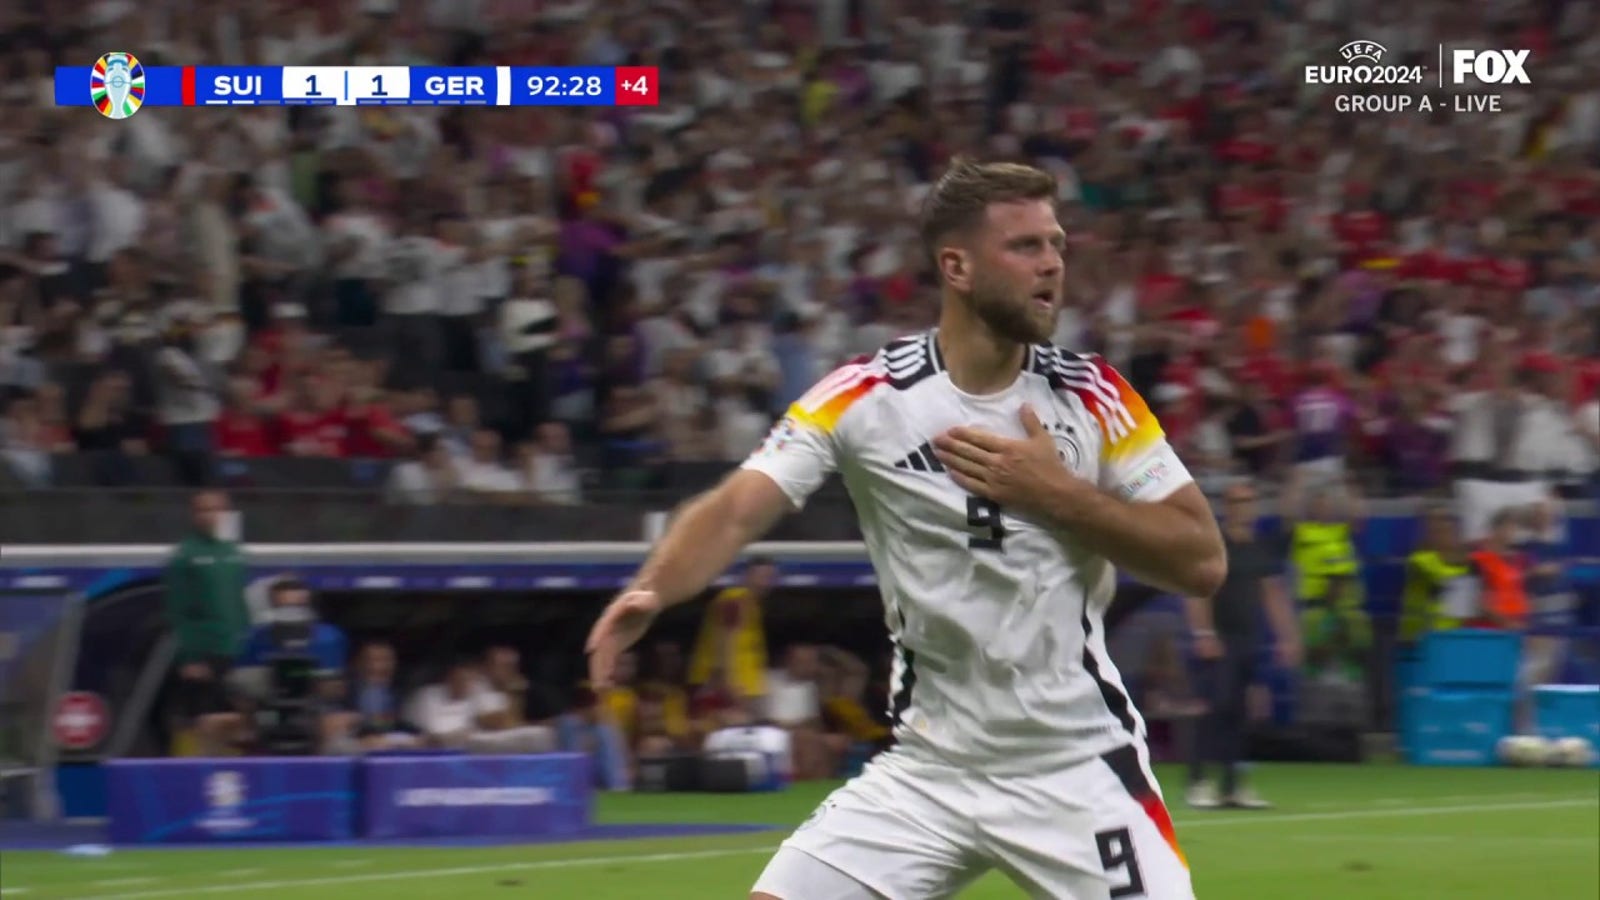 Germany's Niclas Füllkrug scores in stoppage time